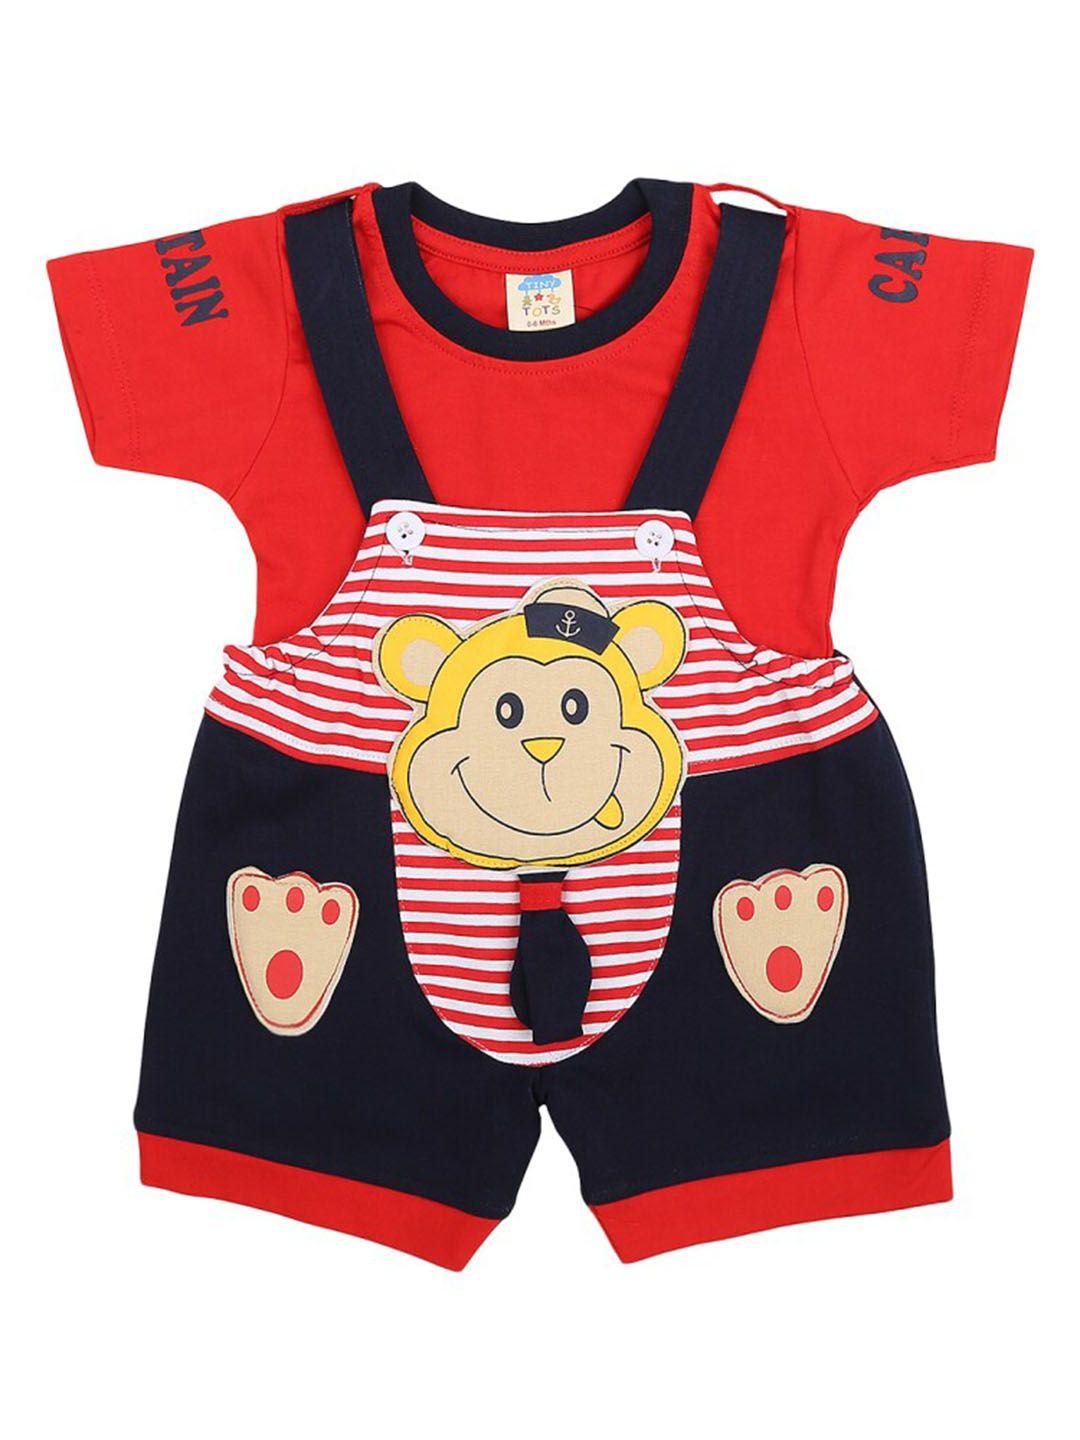 v-mart-infant-conversational-printed-pure-cotton-dungaree-with-t-shirt